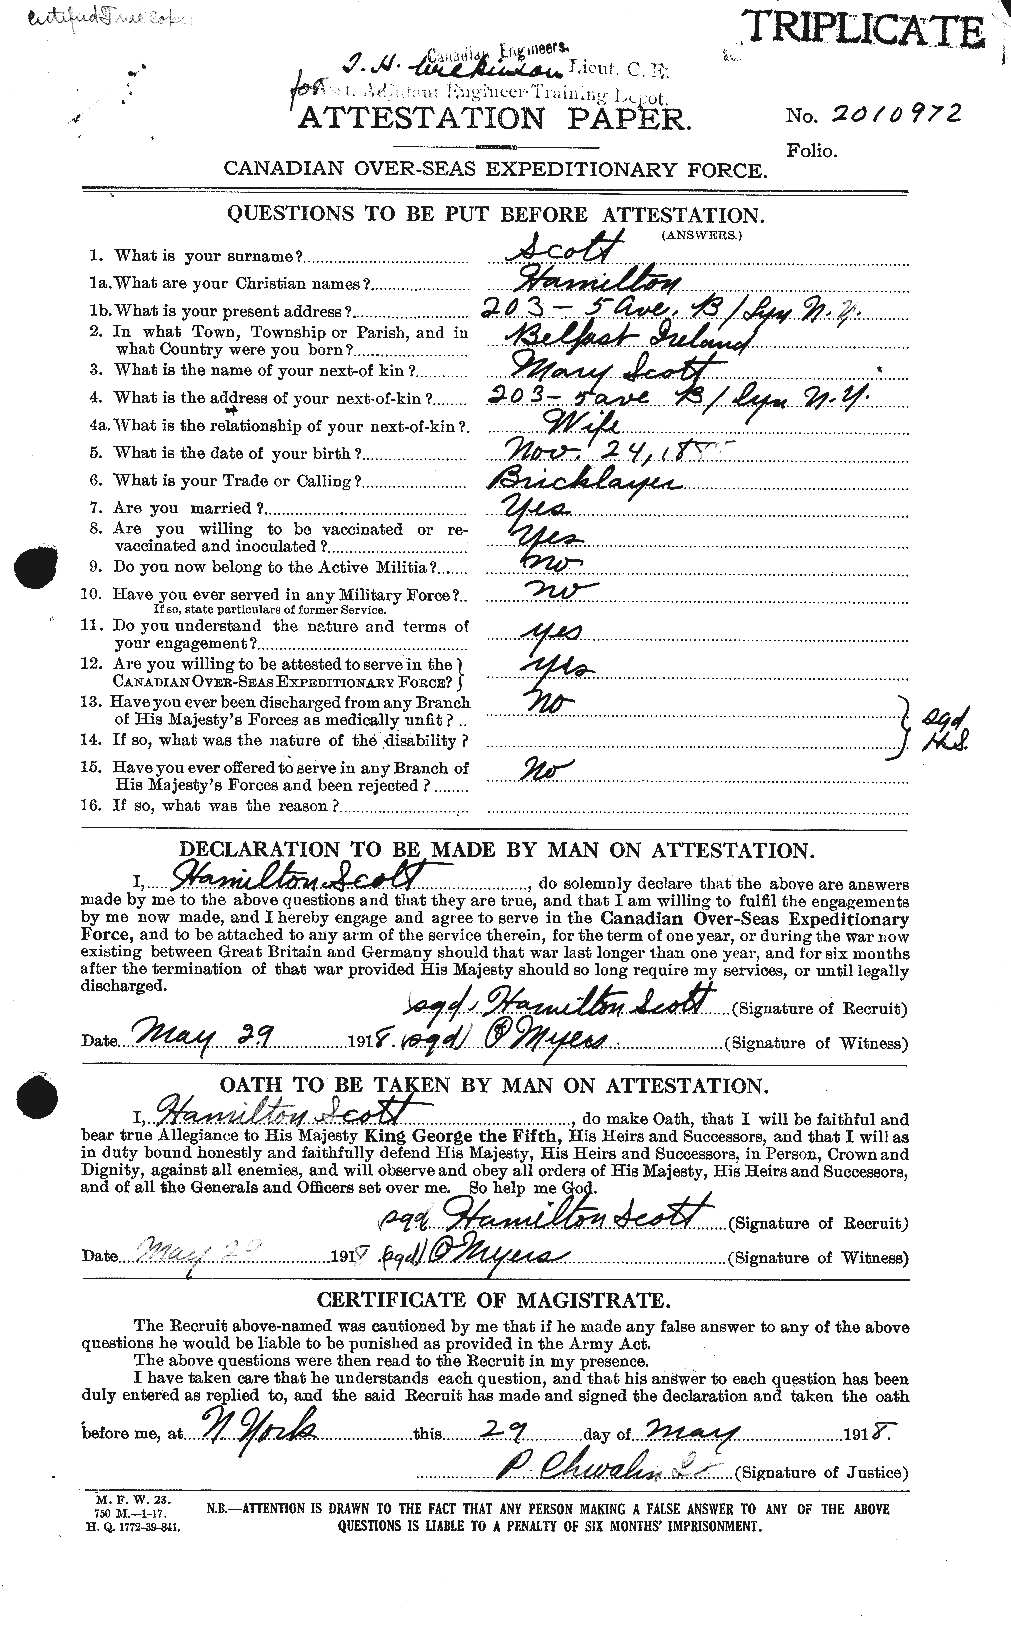 Personnel Records of the First World War - CEF 086345a